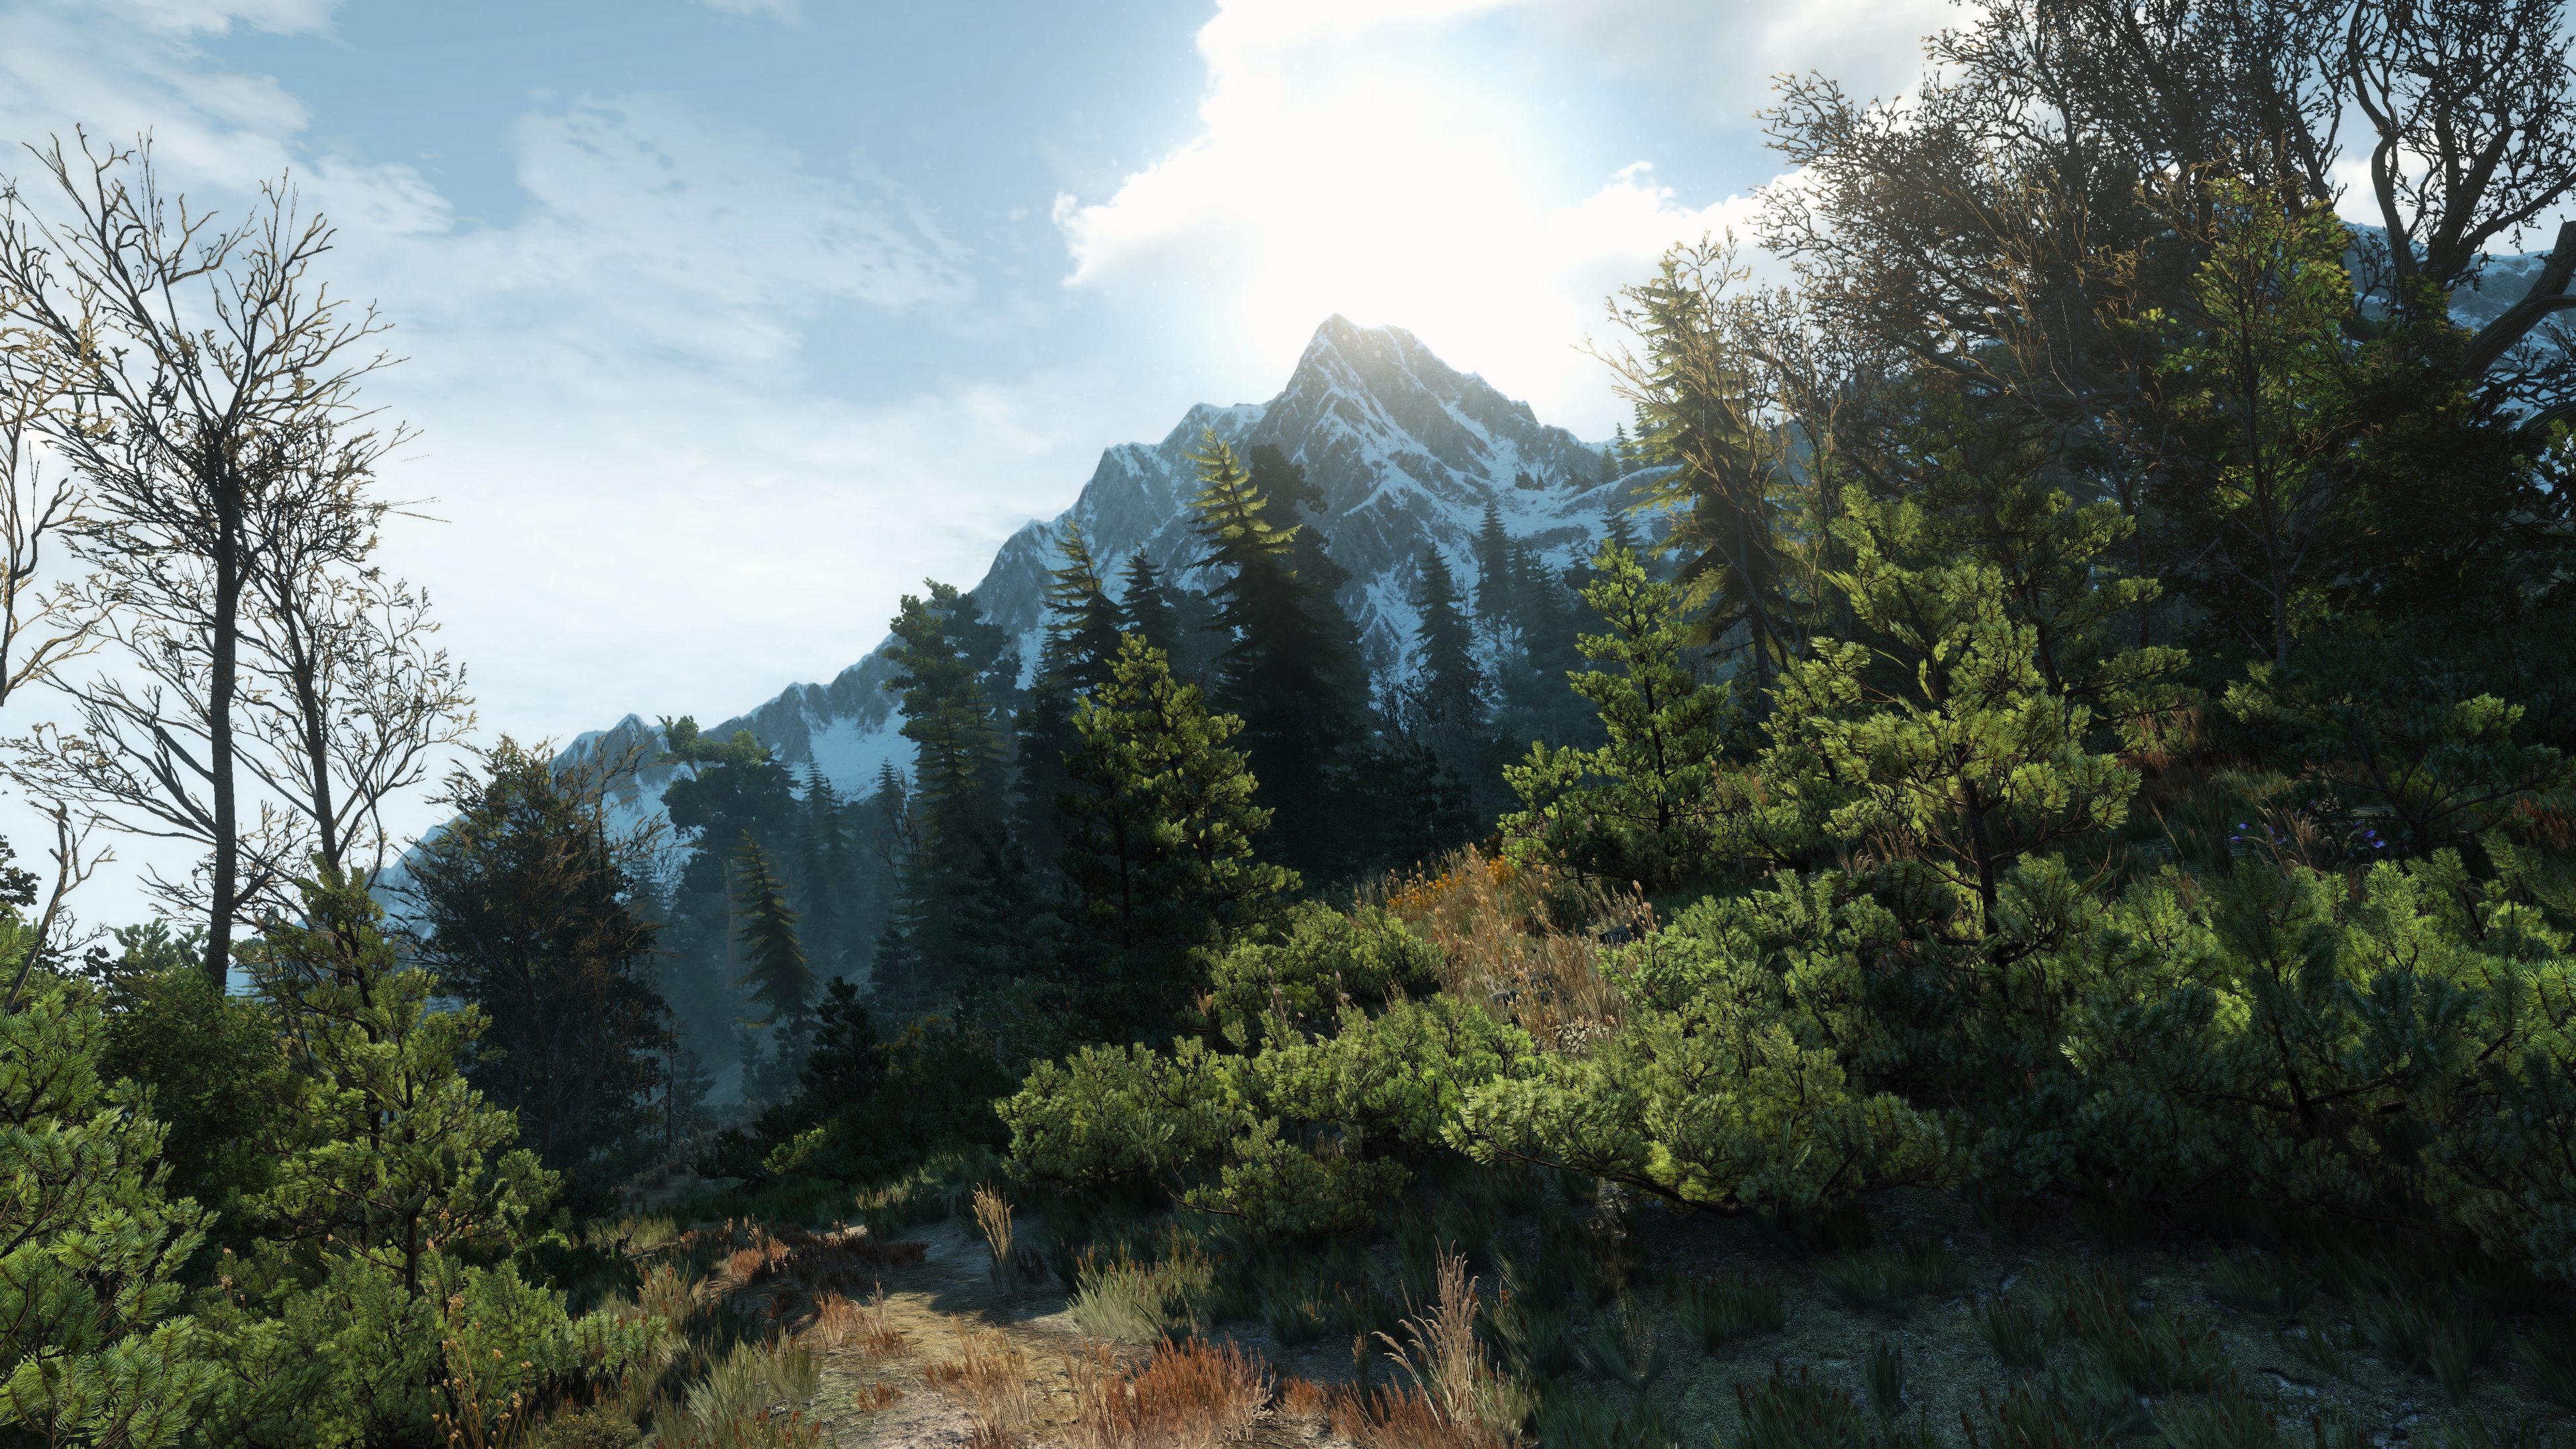 General 3840x2160 The Witcher 3: Wild Hunt PC gaming screen shot mountains landscape video game art sunlight video games nature CGI trees path snowy mountain snow plants